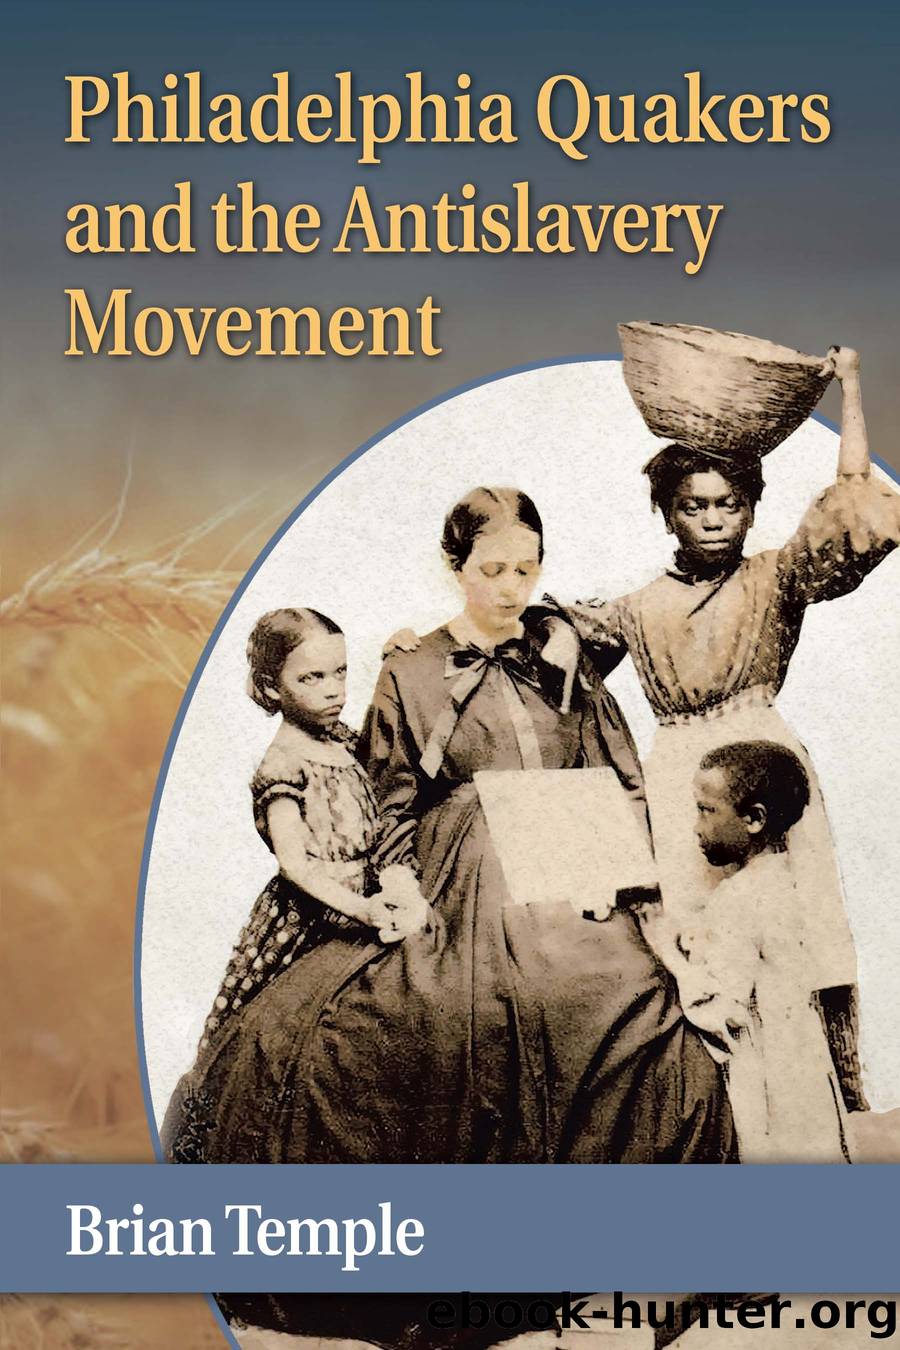 Philadelphia Quakers and the Antislavery Movement by Brian Temple